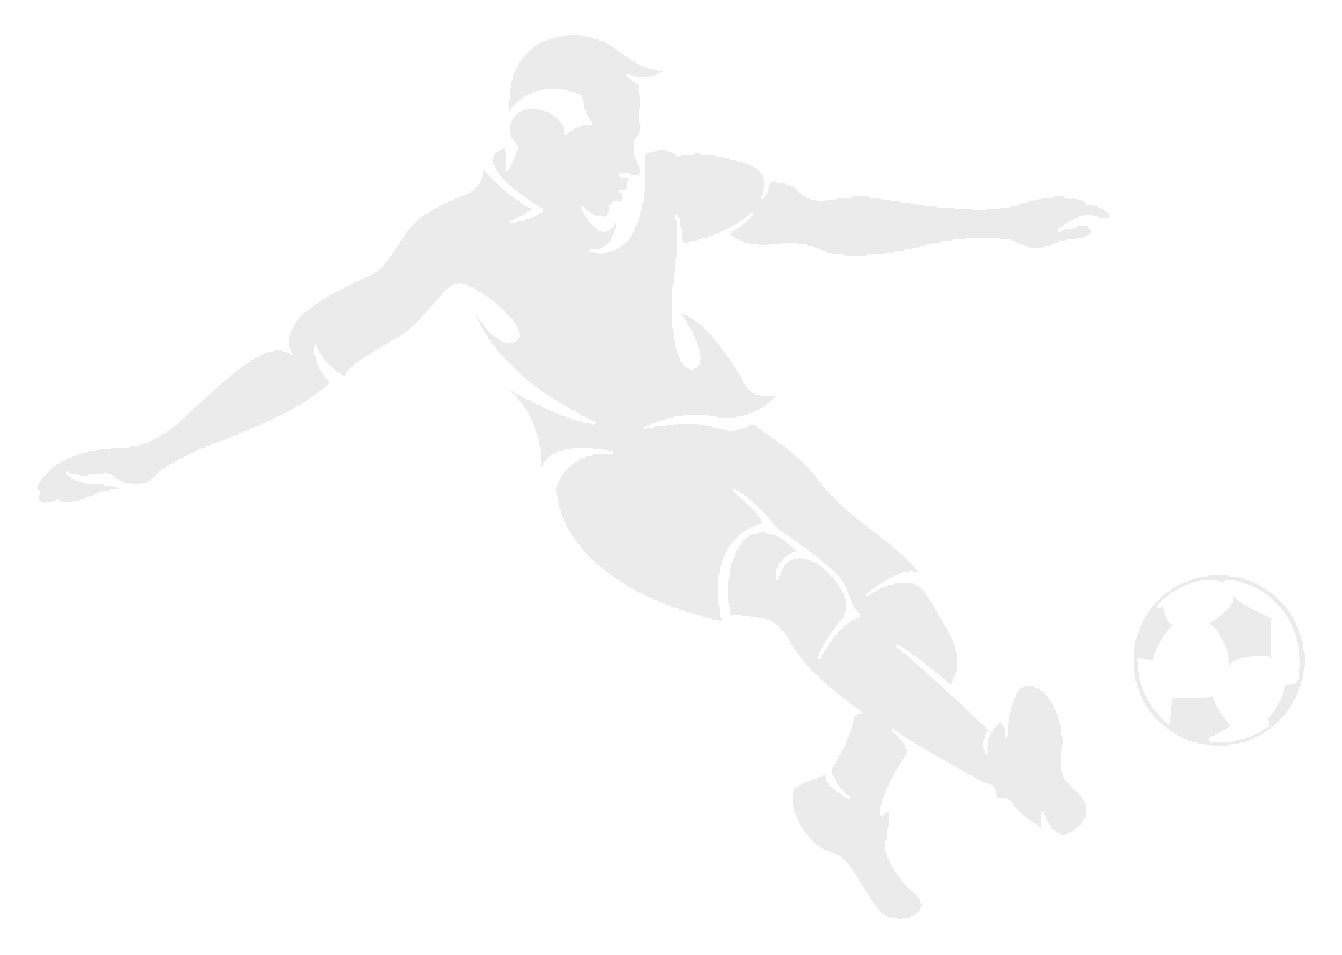 Png Football Player With Ball Yellow Silhouette | Citypng